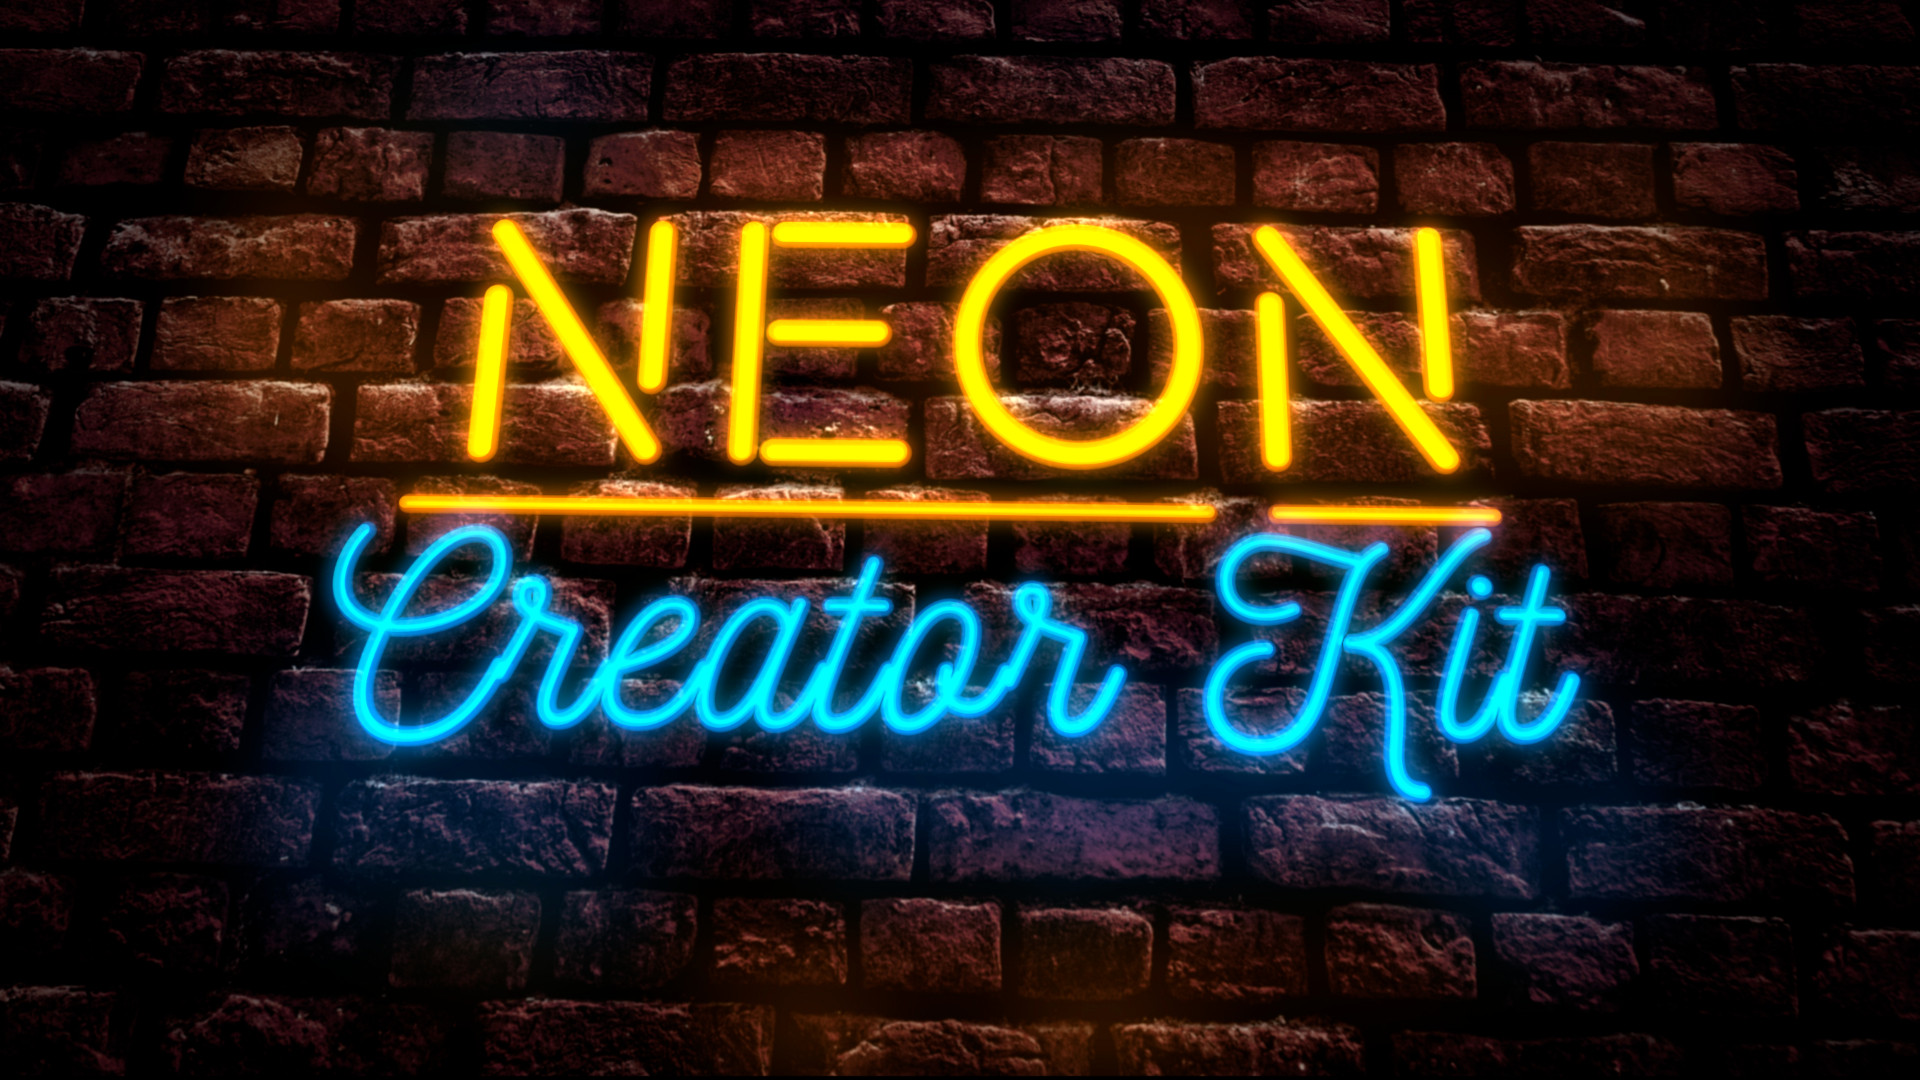 neon-sign-creator-kit-motion-graphics-templates-motion-array